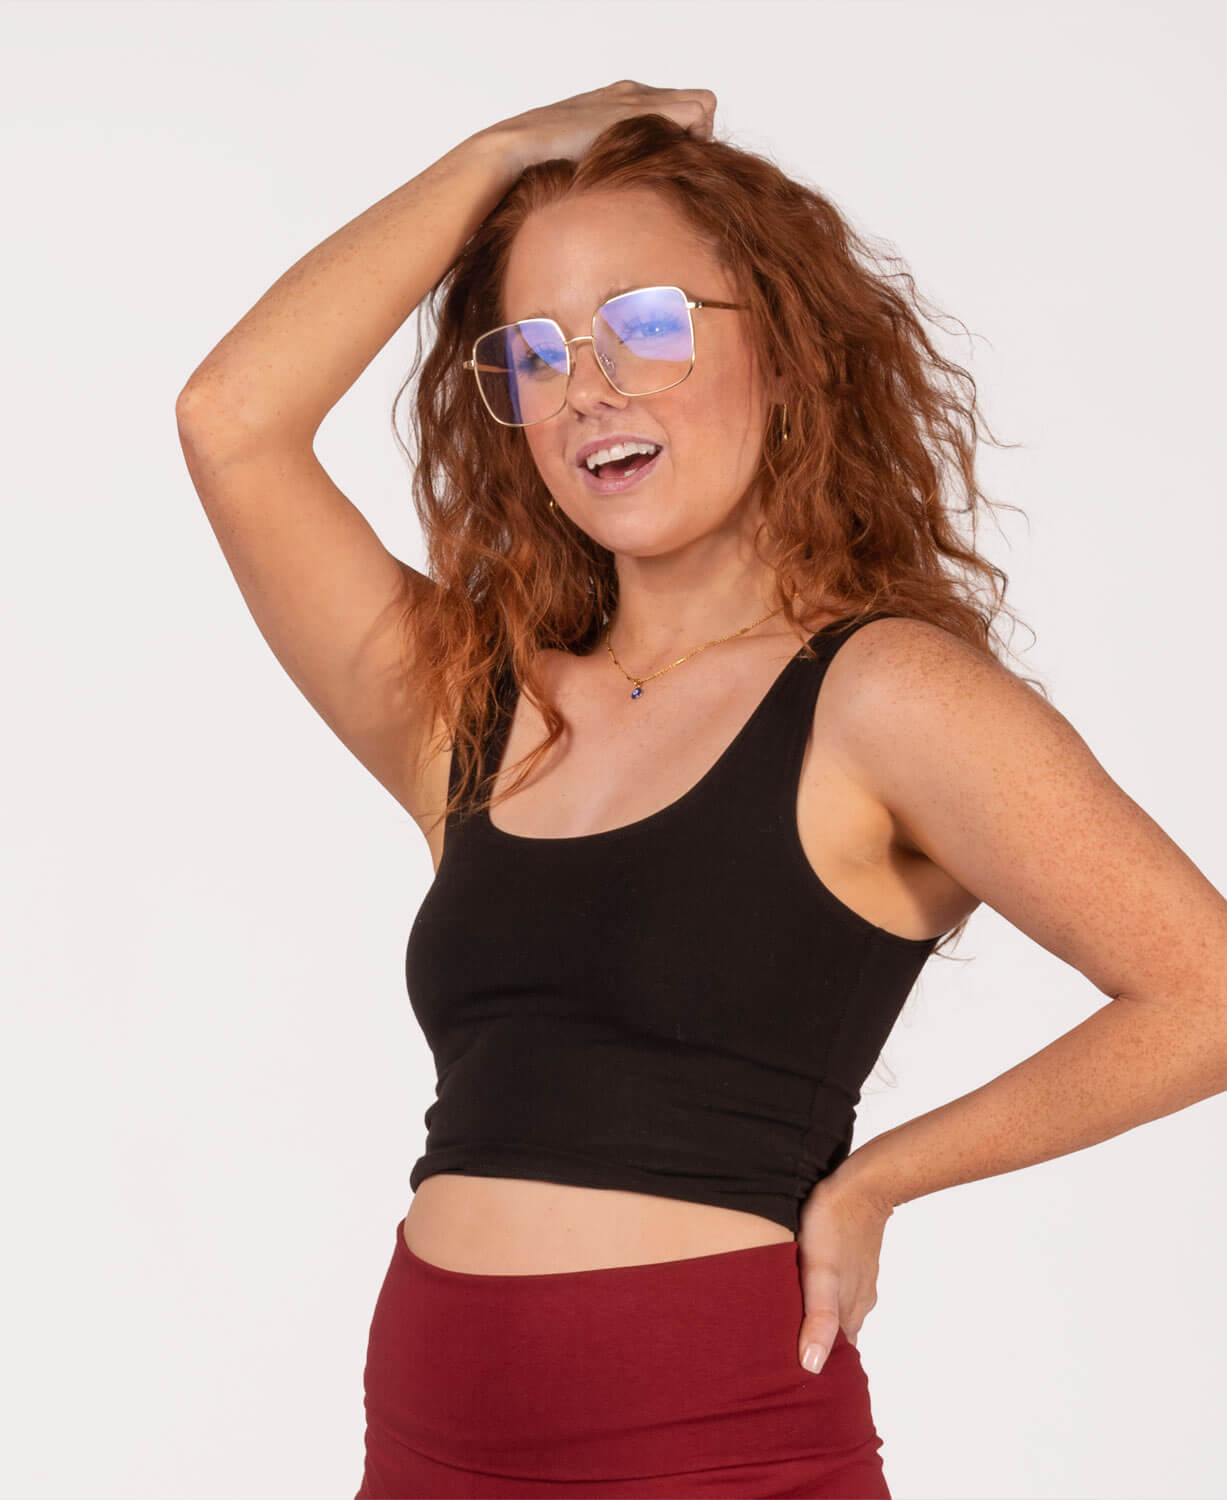 Black Organic Crop Top, Fitted Cropped Tank Top